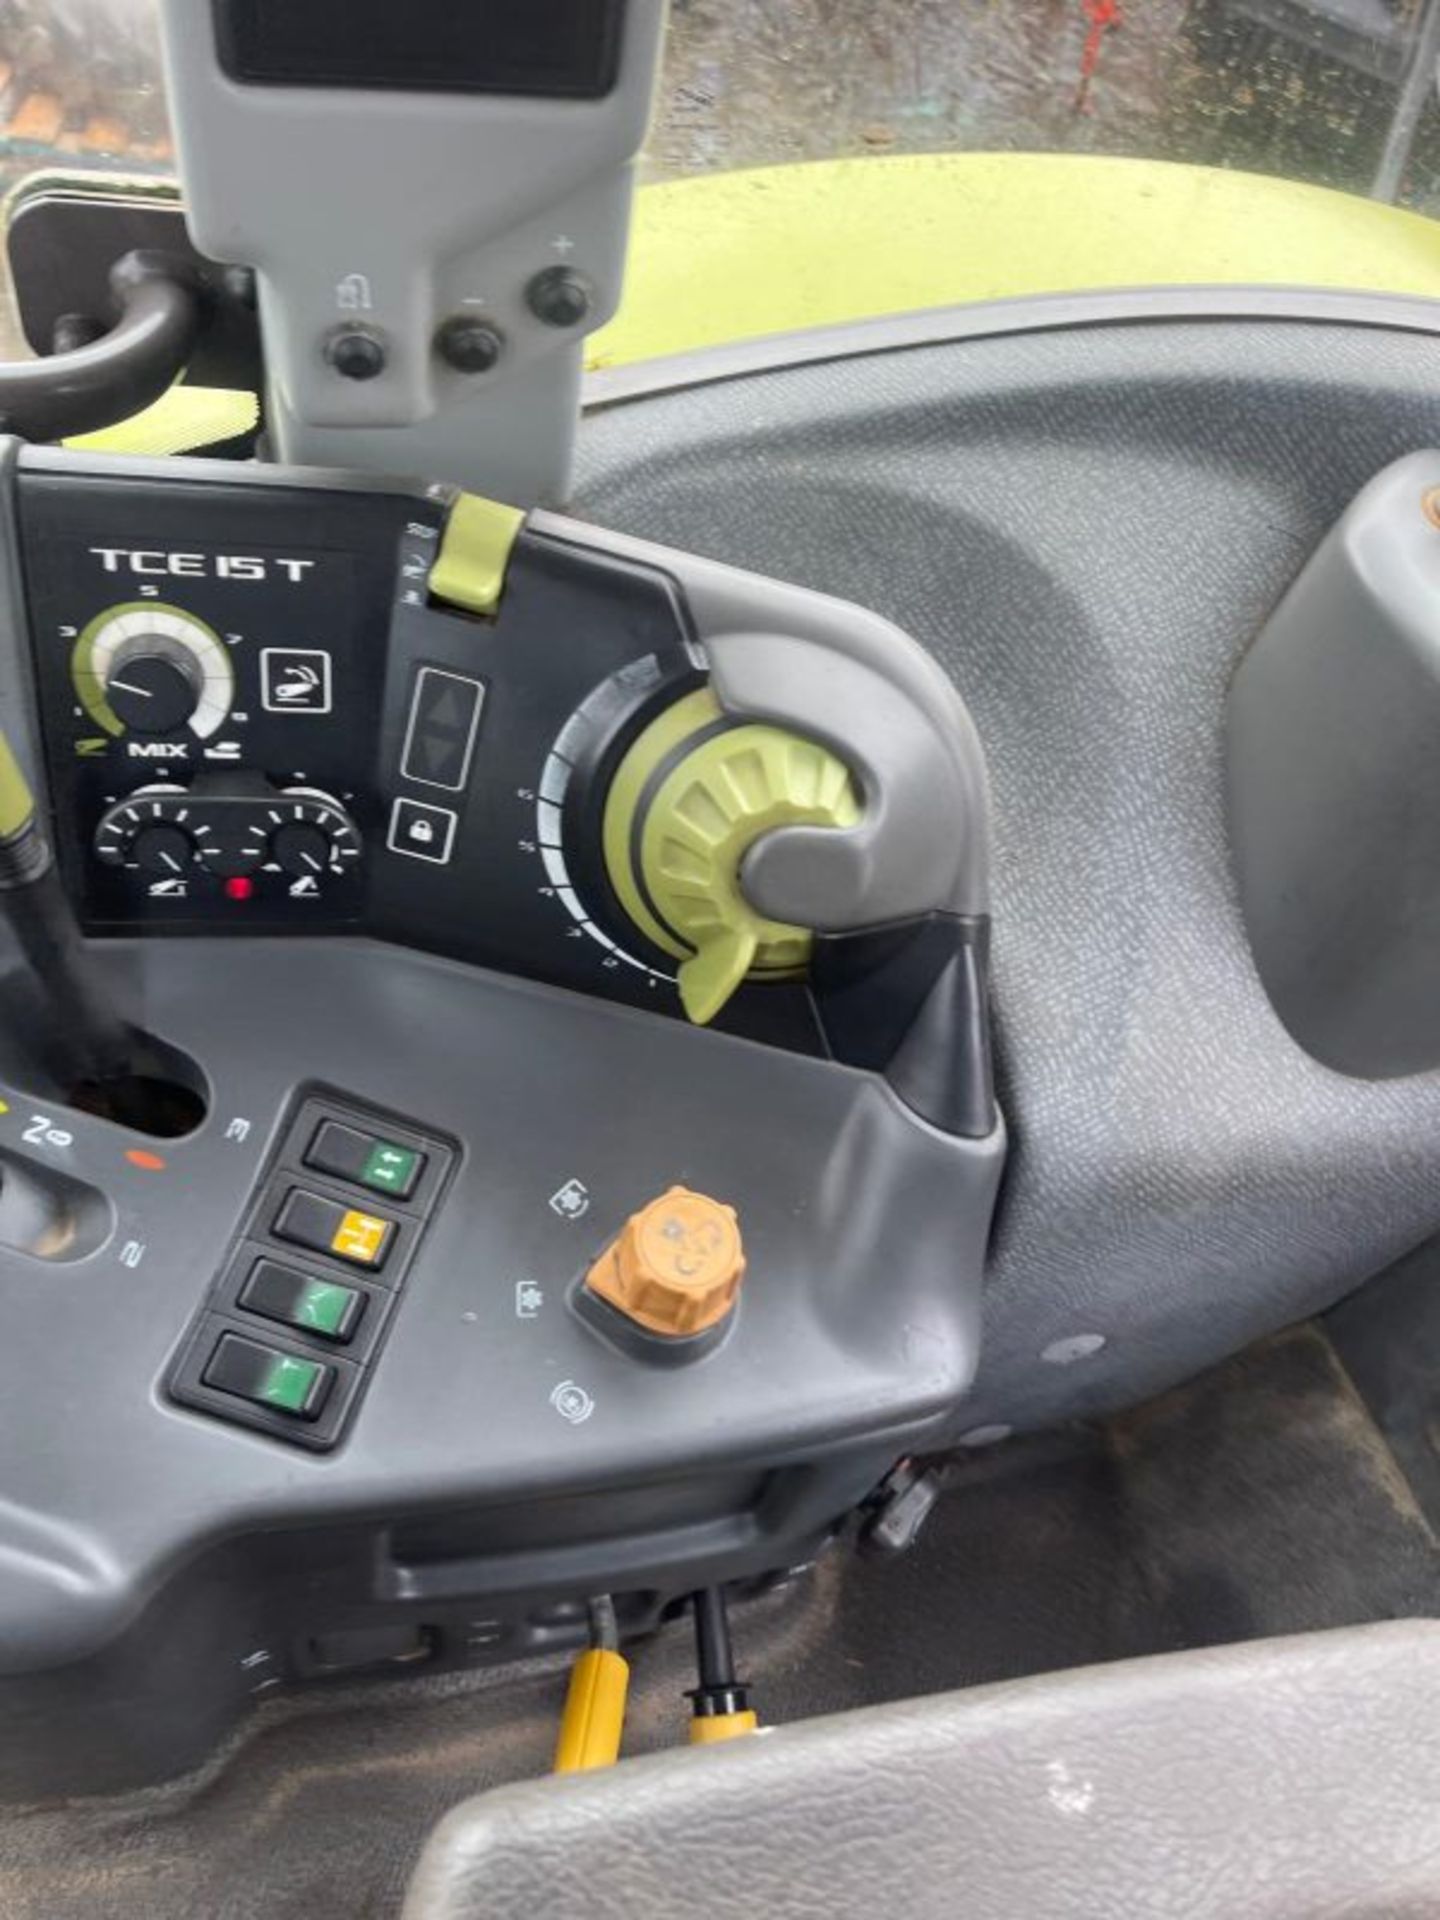 CLAAS 657 TRACTOR - Image 5 of 10